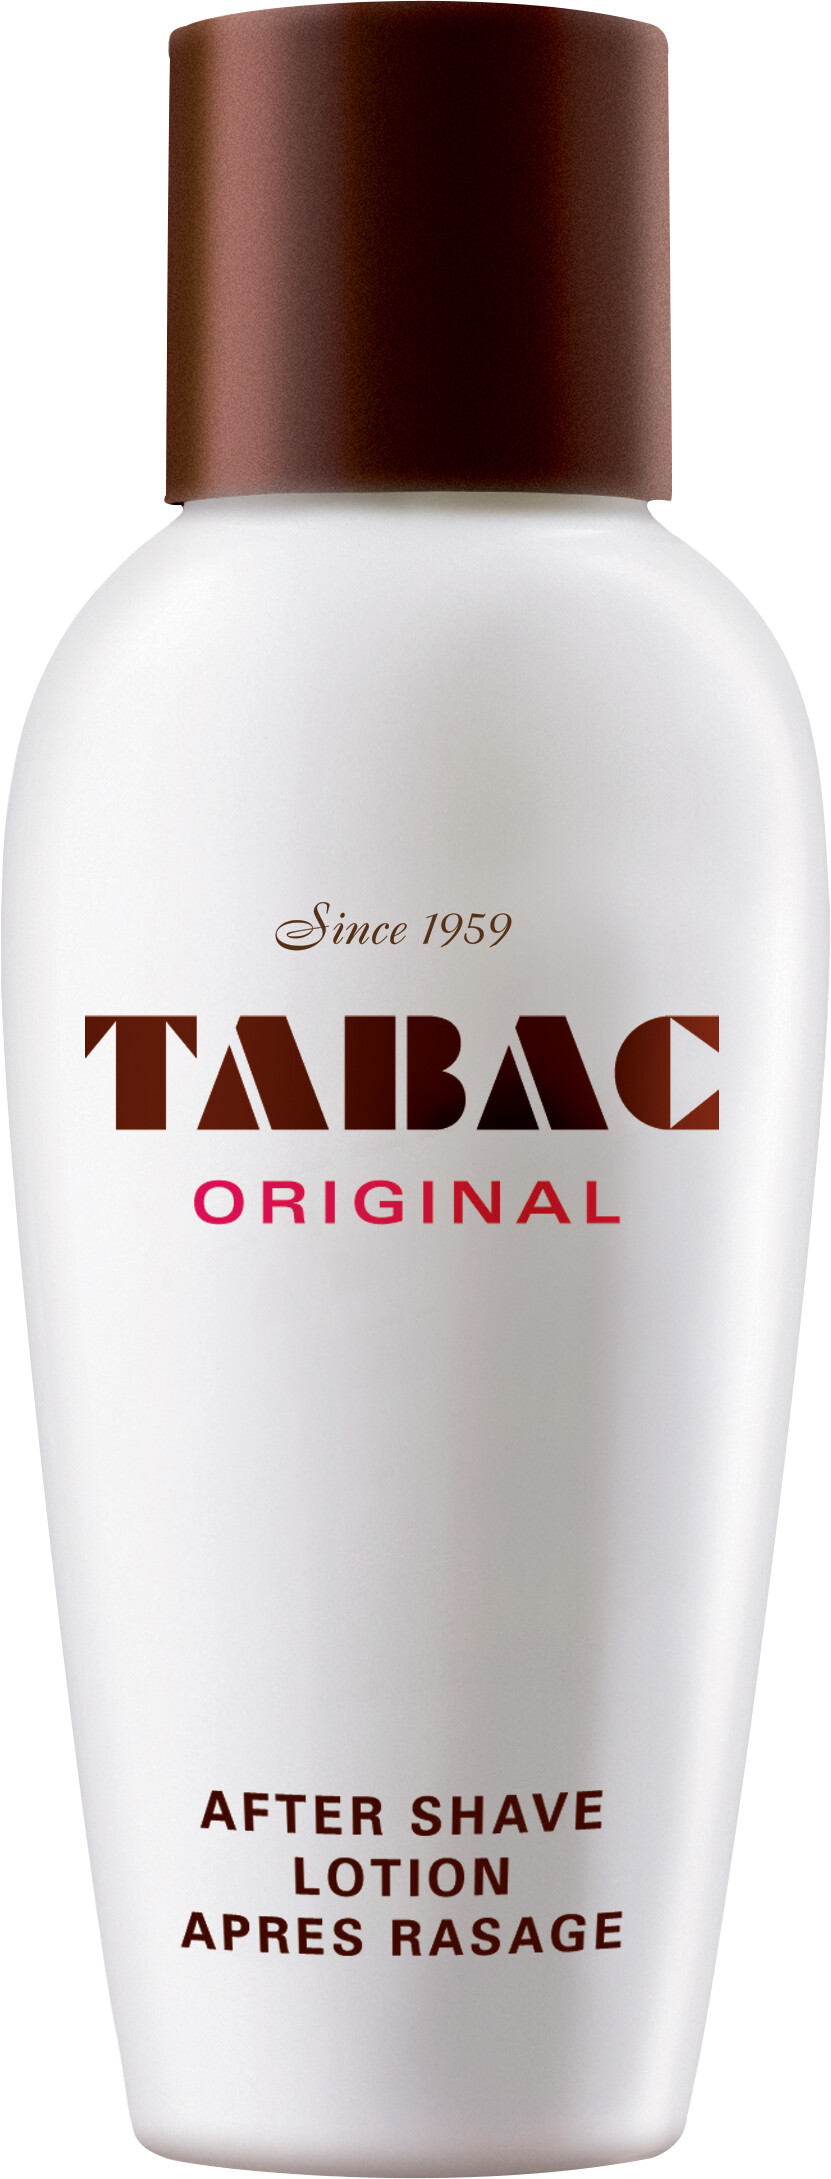 TABAC Original Aftershave Lotion 150ml